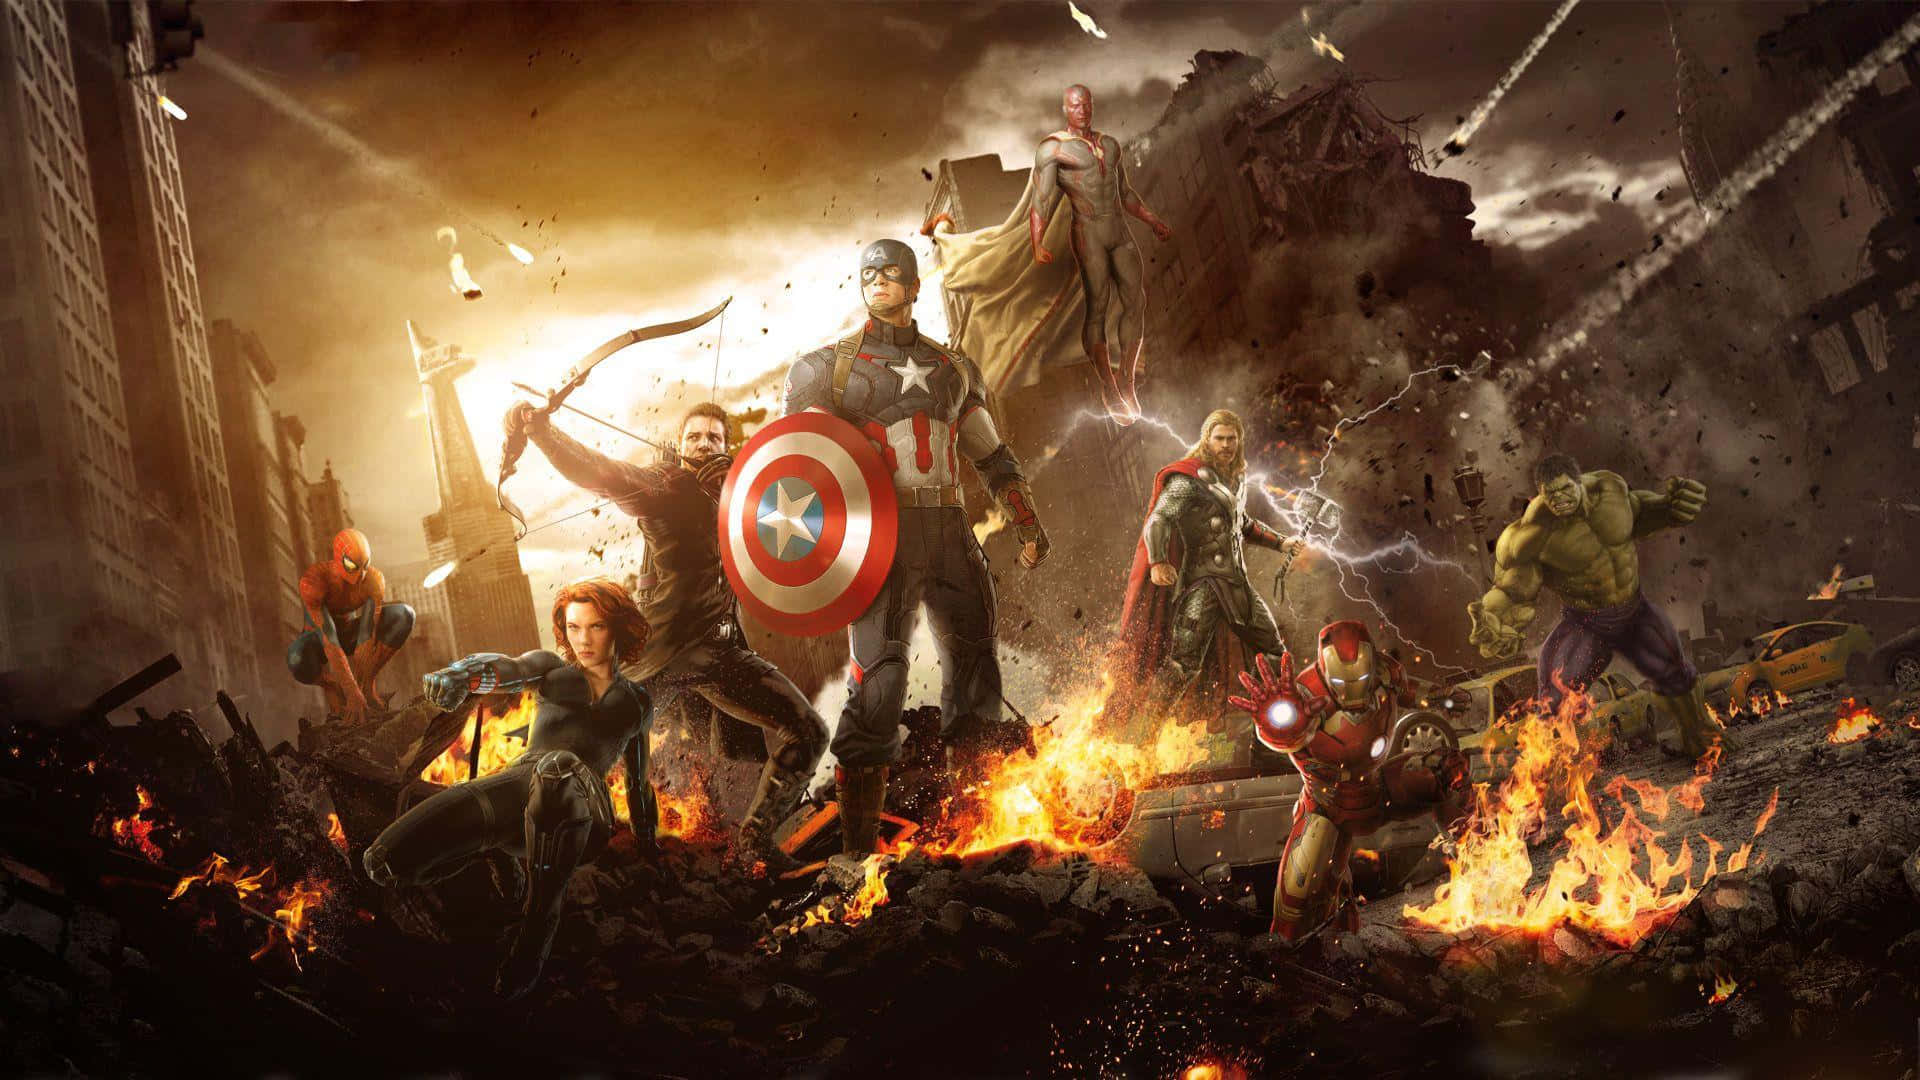 Marvel's Mightiest Superheroes Assemble For Avengers: Infinity War